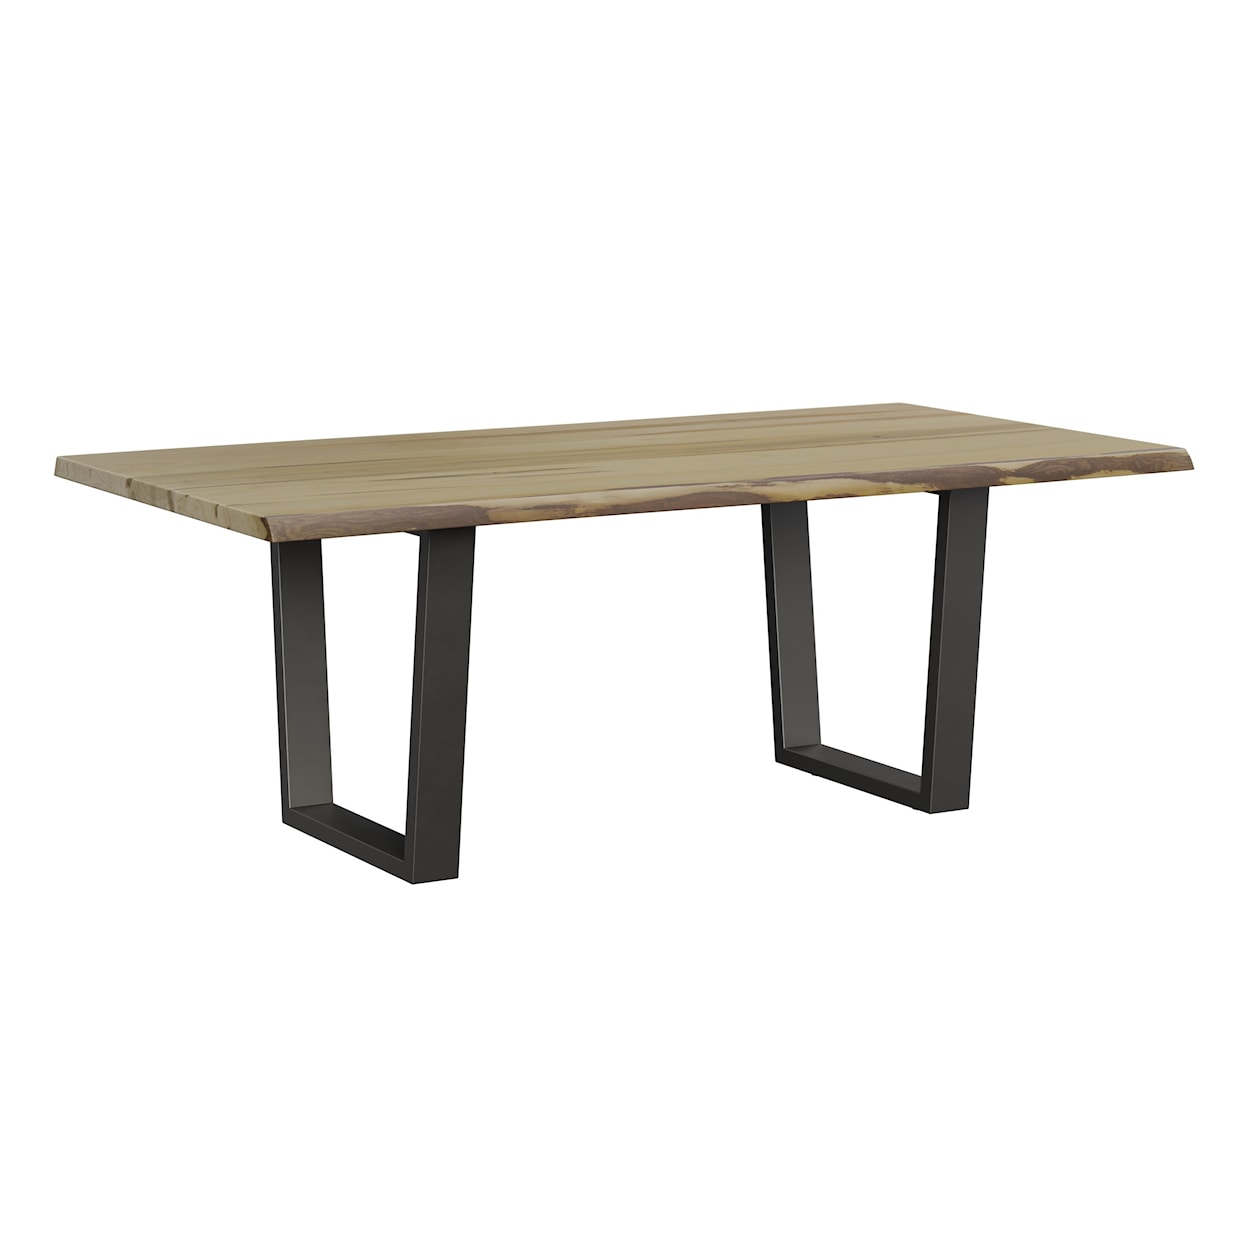 Canal Dover Furniture Bordeaux Live Edge Dining Table - Standard Base